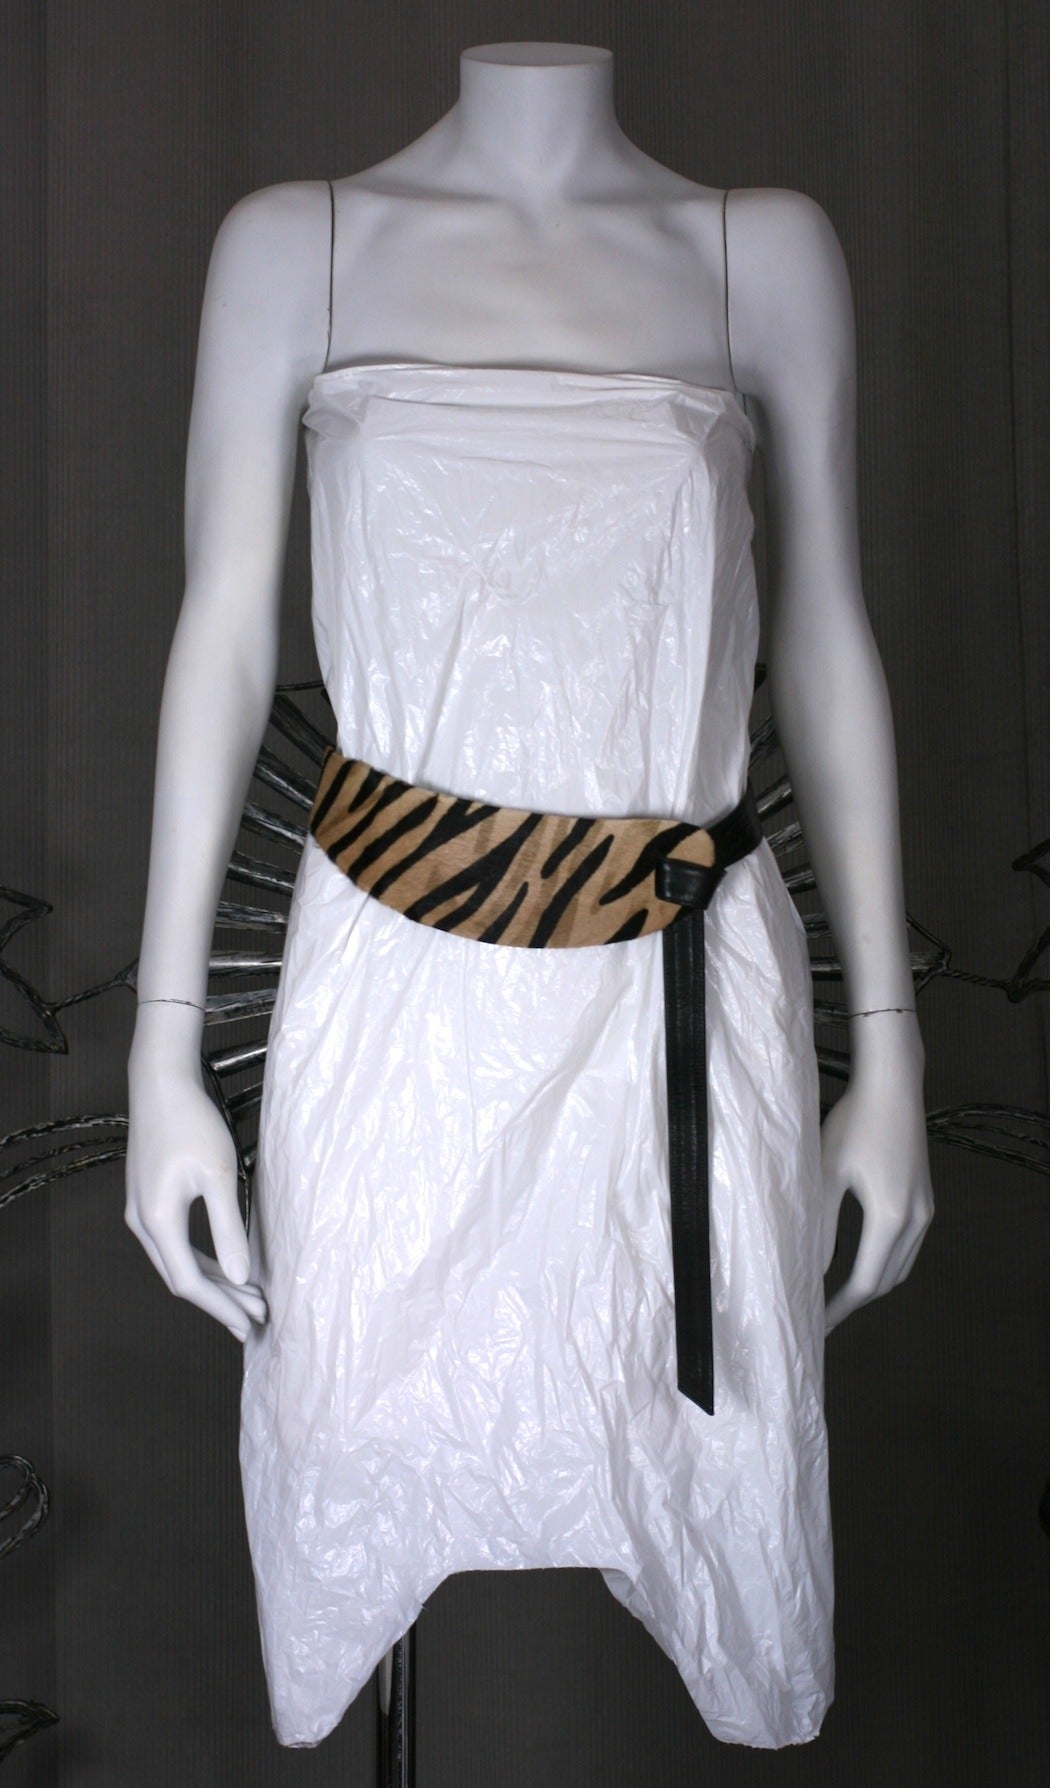 Halston Tiger print belt which loops in signature fashion with a leather tie, like many of the belts made for him by Elsa Peretti. The front lobe shaped panel is pony skin with a tiger print which attached to a black calf leather tie which can be